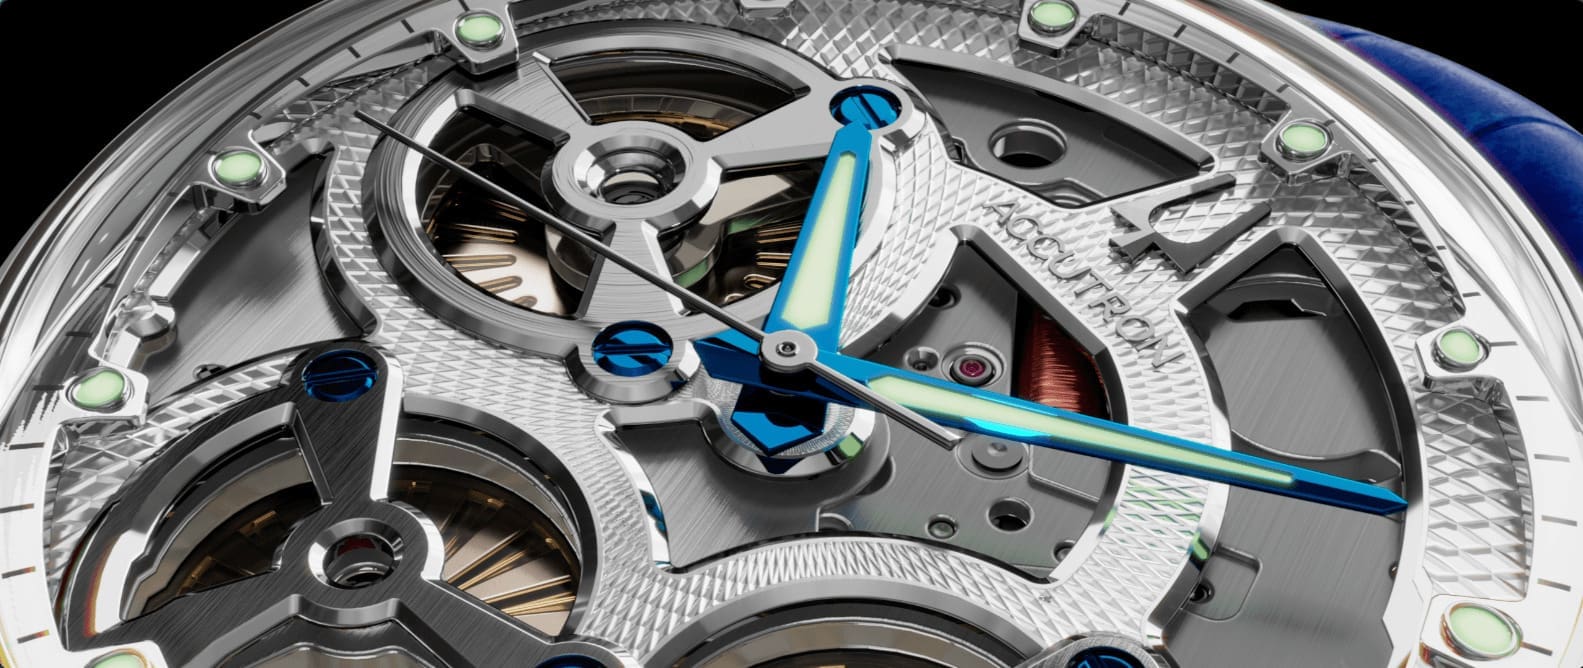 The Accutron Spaceview Evolution is a more decorative twist on the Spaceview 2020